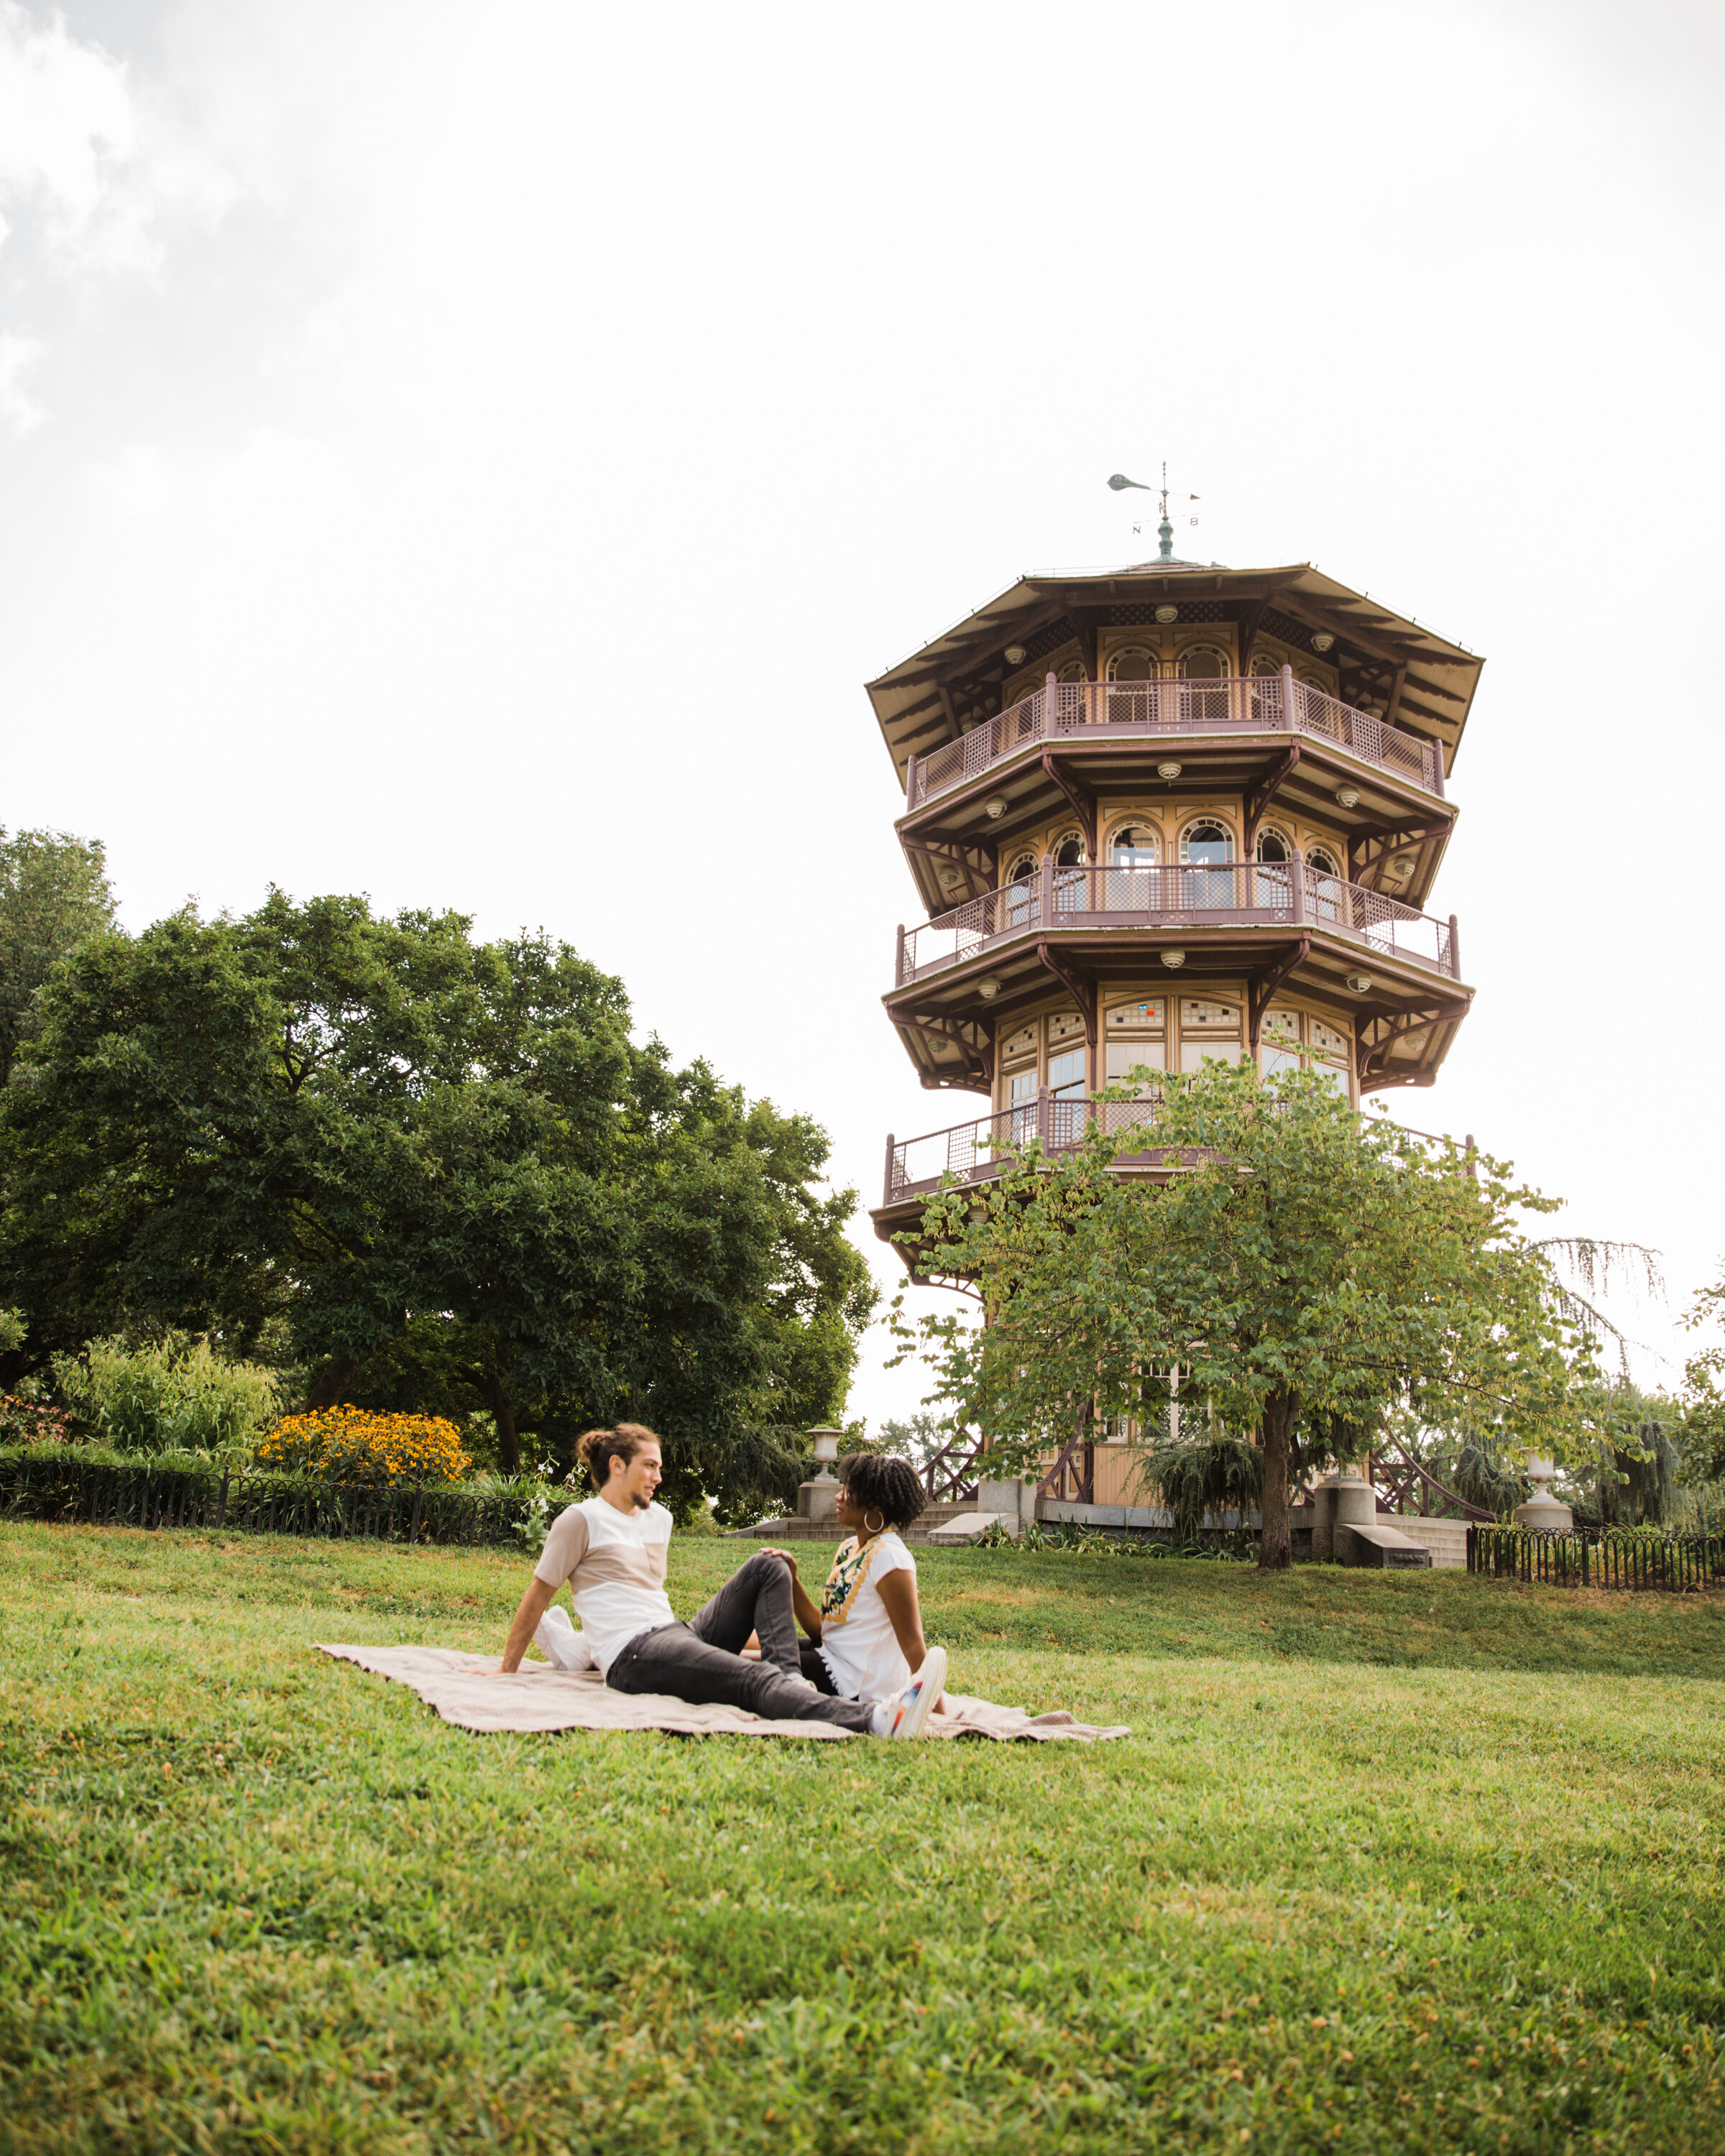 Golden Hour Engagement Session in Baltimore Maryland Patterson Park Pagoda DC Wedding Photographers Megapixels Media Photography and Videography Mixed Couple Multiracial Bride and Groom-33.jpg